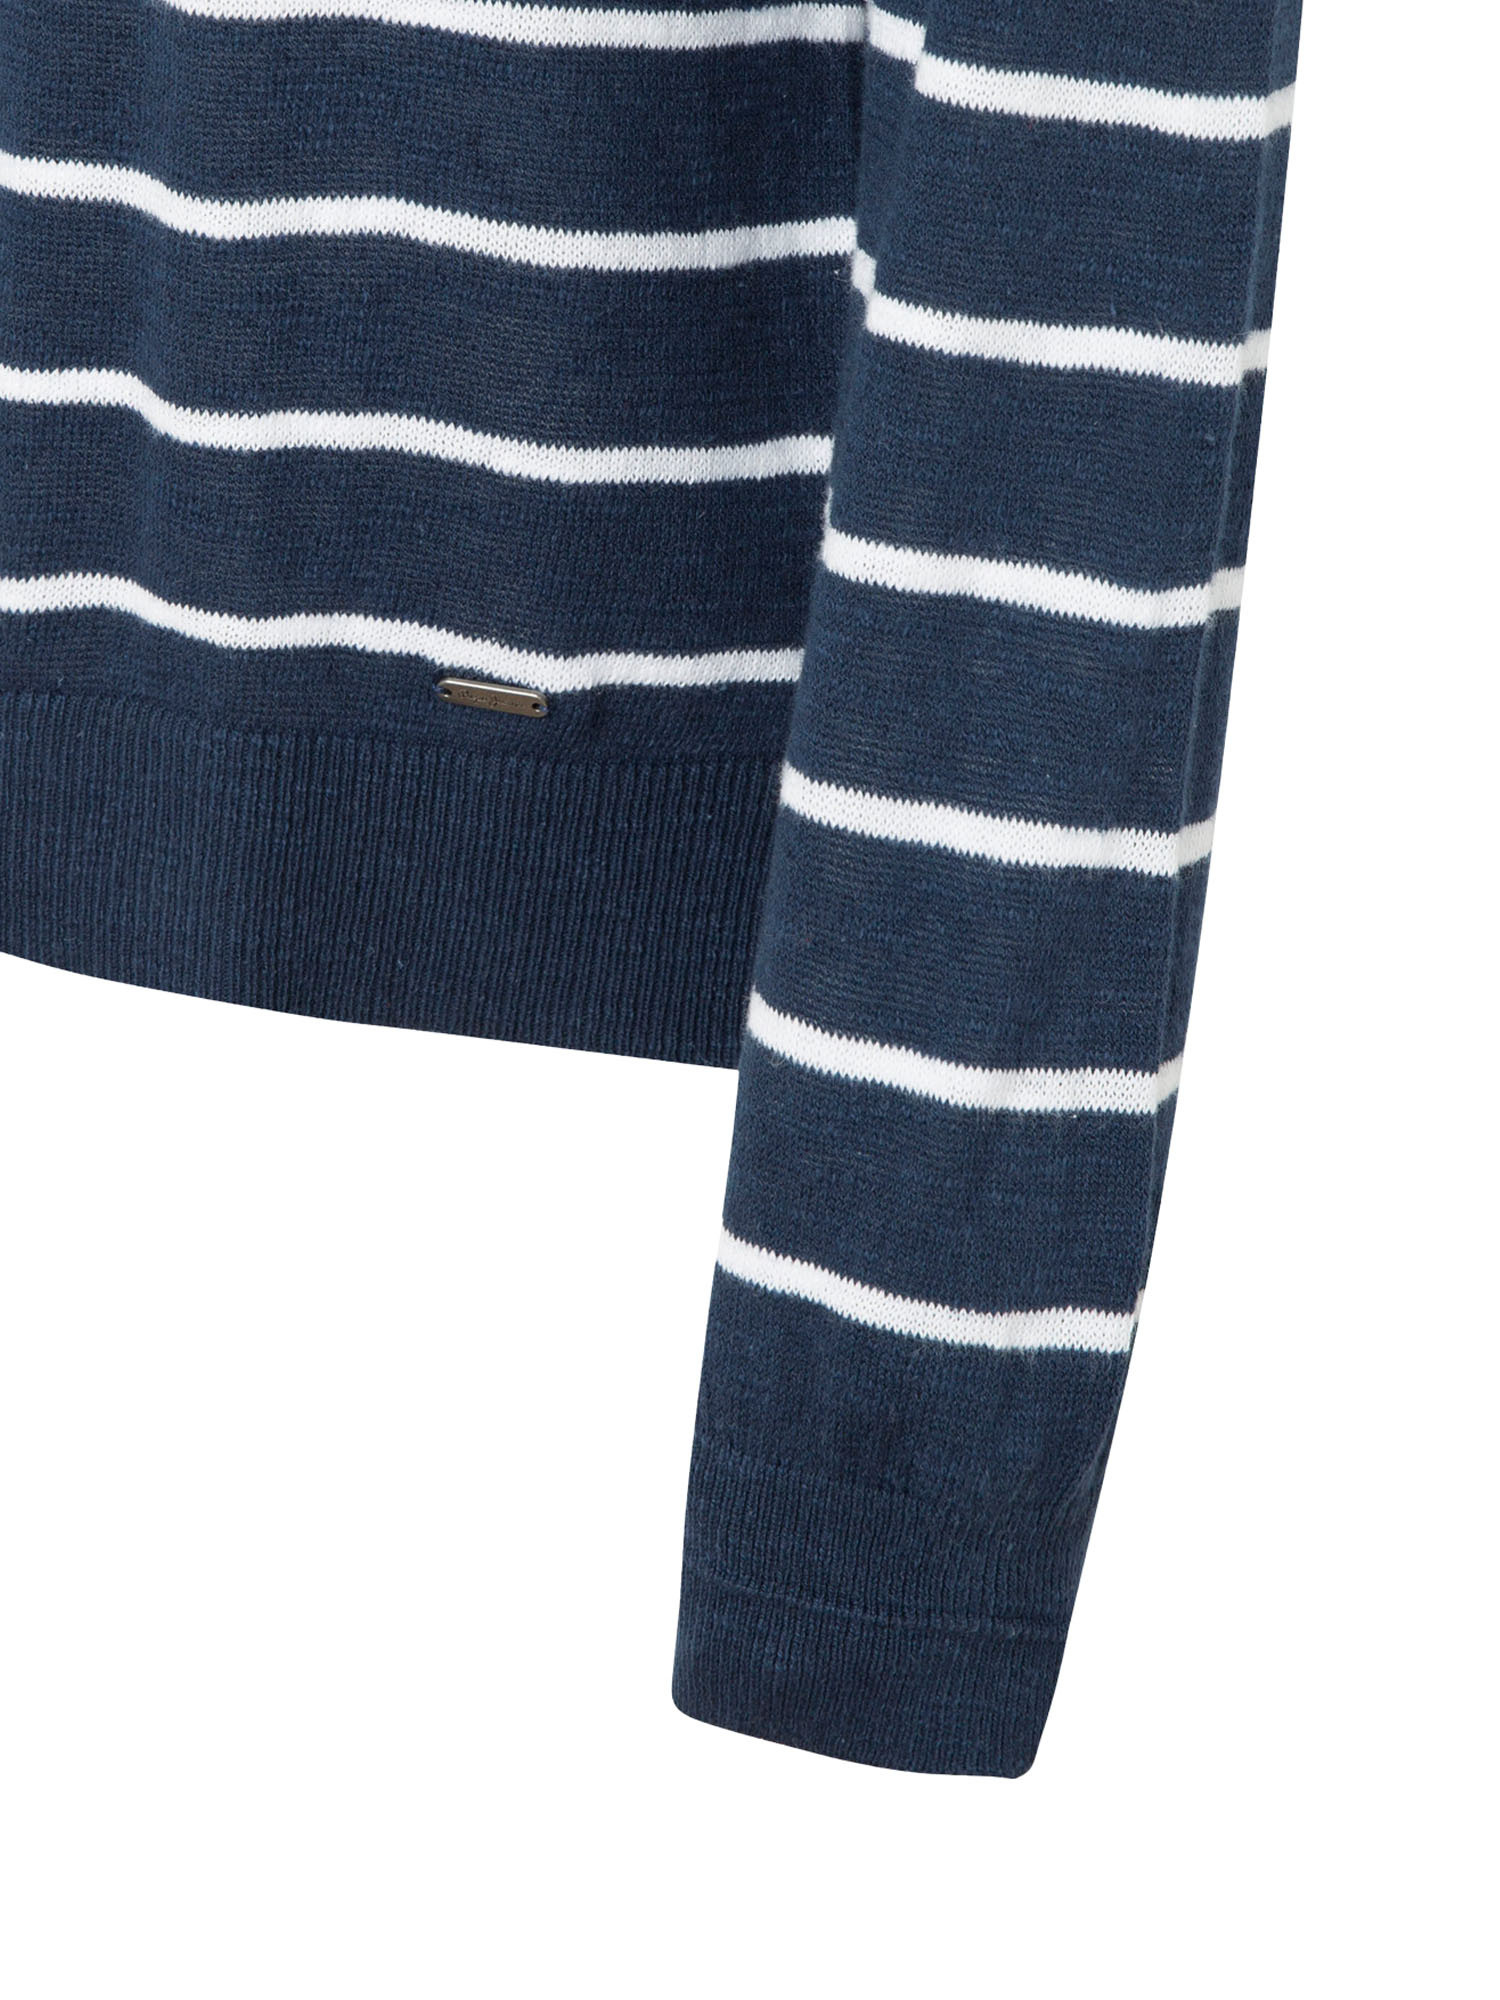 Pepe Jeans - Pullover a righe, Blu scuro, large image number 2